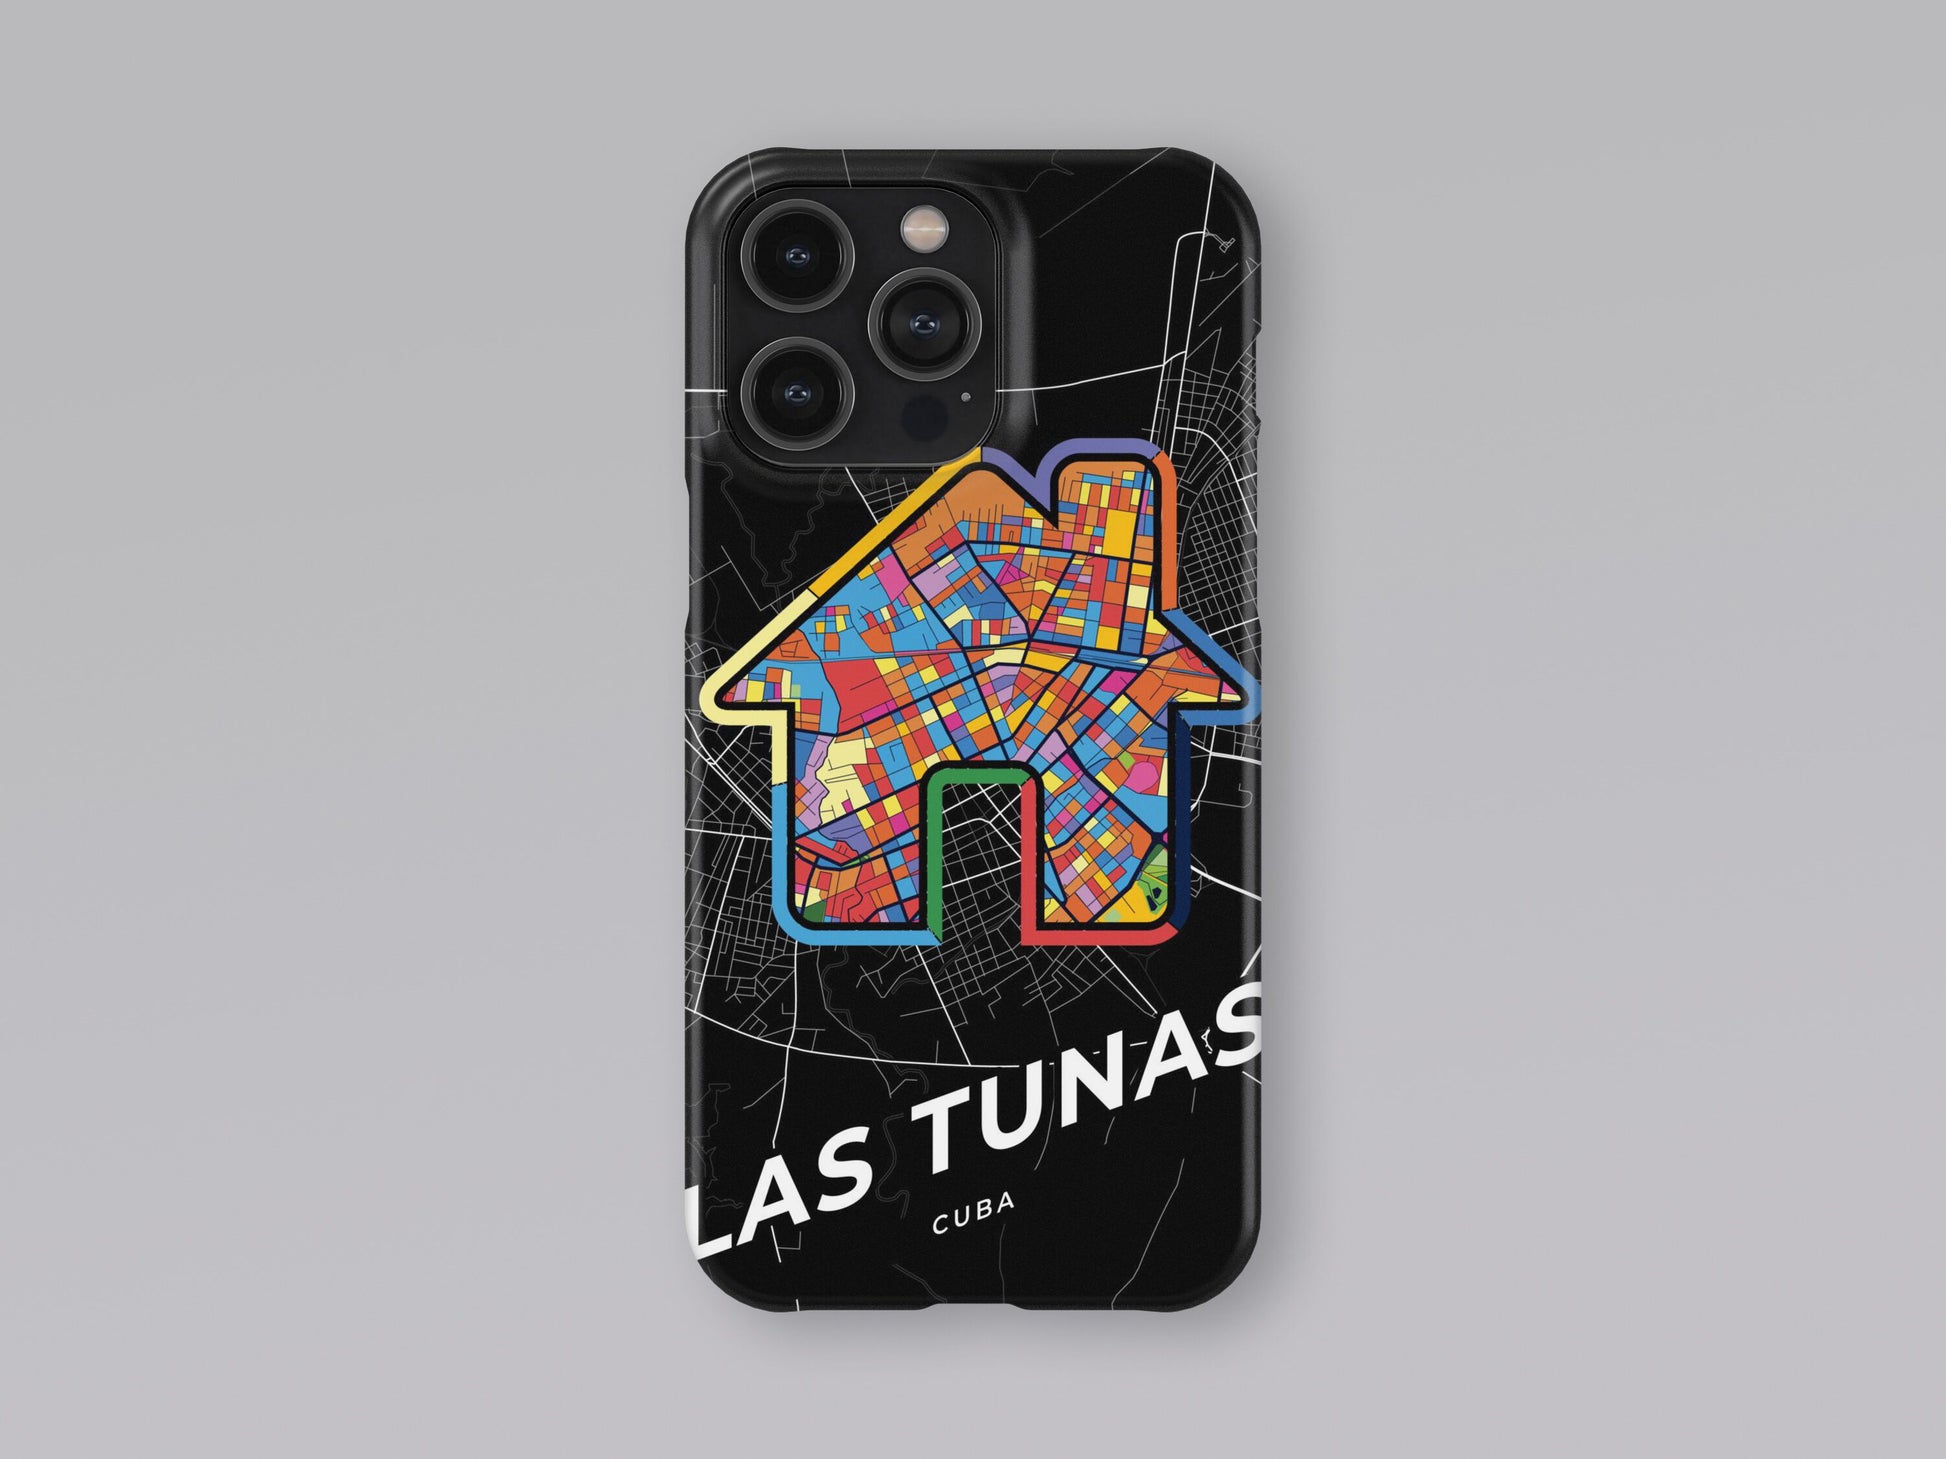 Las Tunas Cuba slim phone case with colorful icon. Birthday, wedding or housewarming gift. Couple match cases. 3